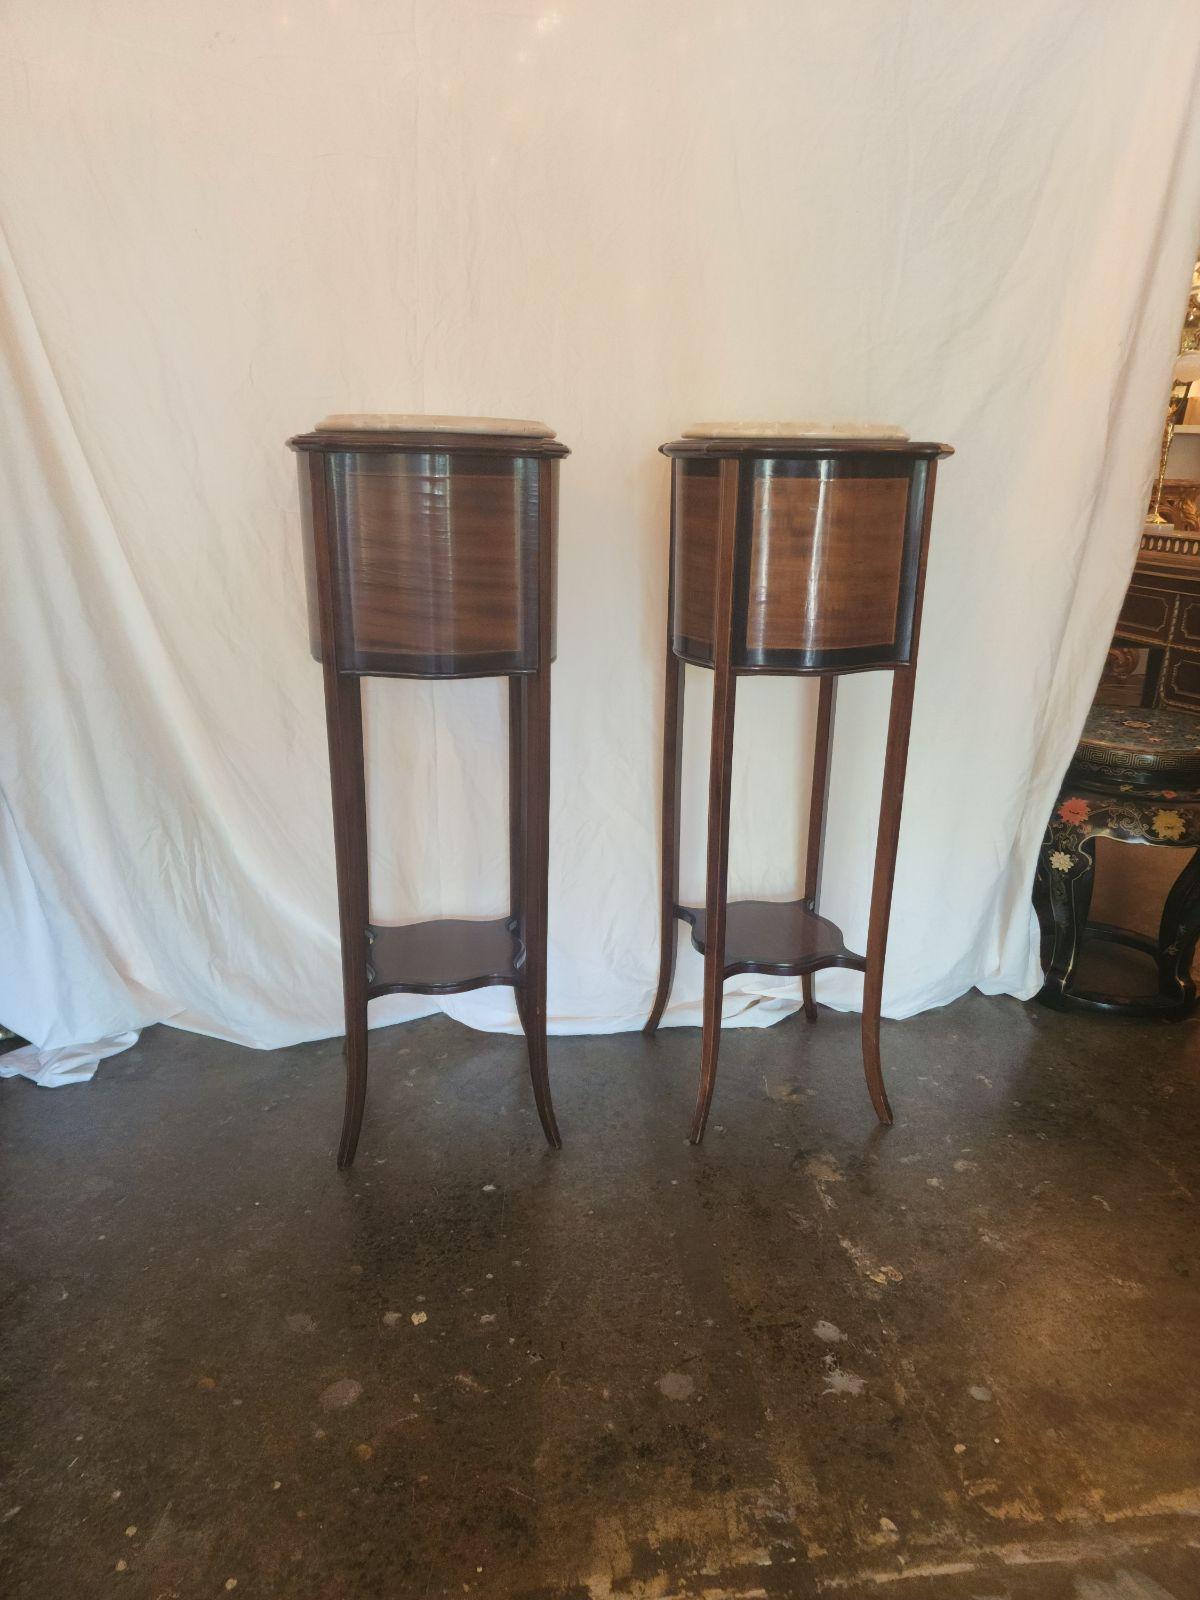 Elegant Antique Edwardian Mahogany and marble jardiniere or plant stand, circa 1905 In a Sheraton Revival Design, It has Ebonised serpentine shape sides with chequered inlay. Matching Pair.